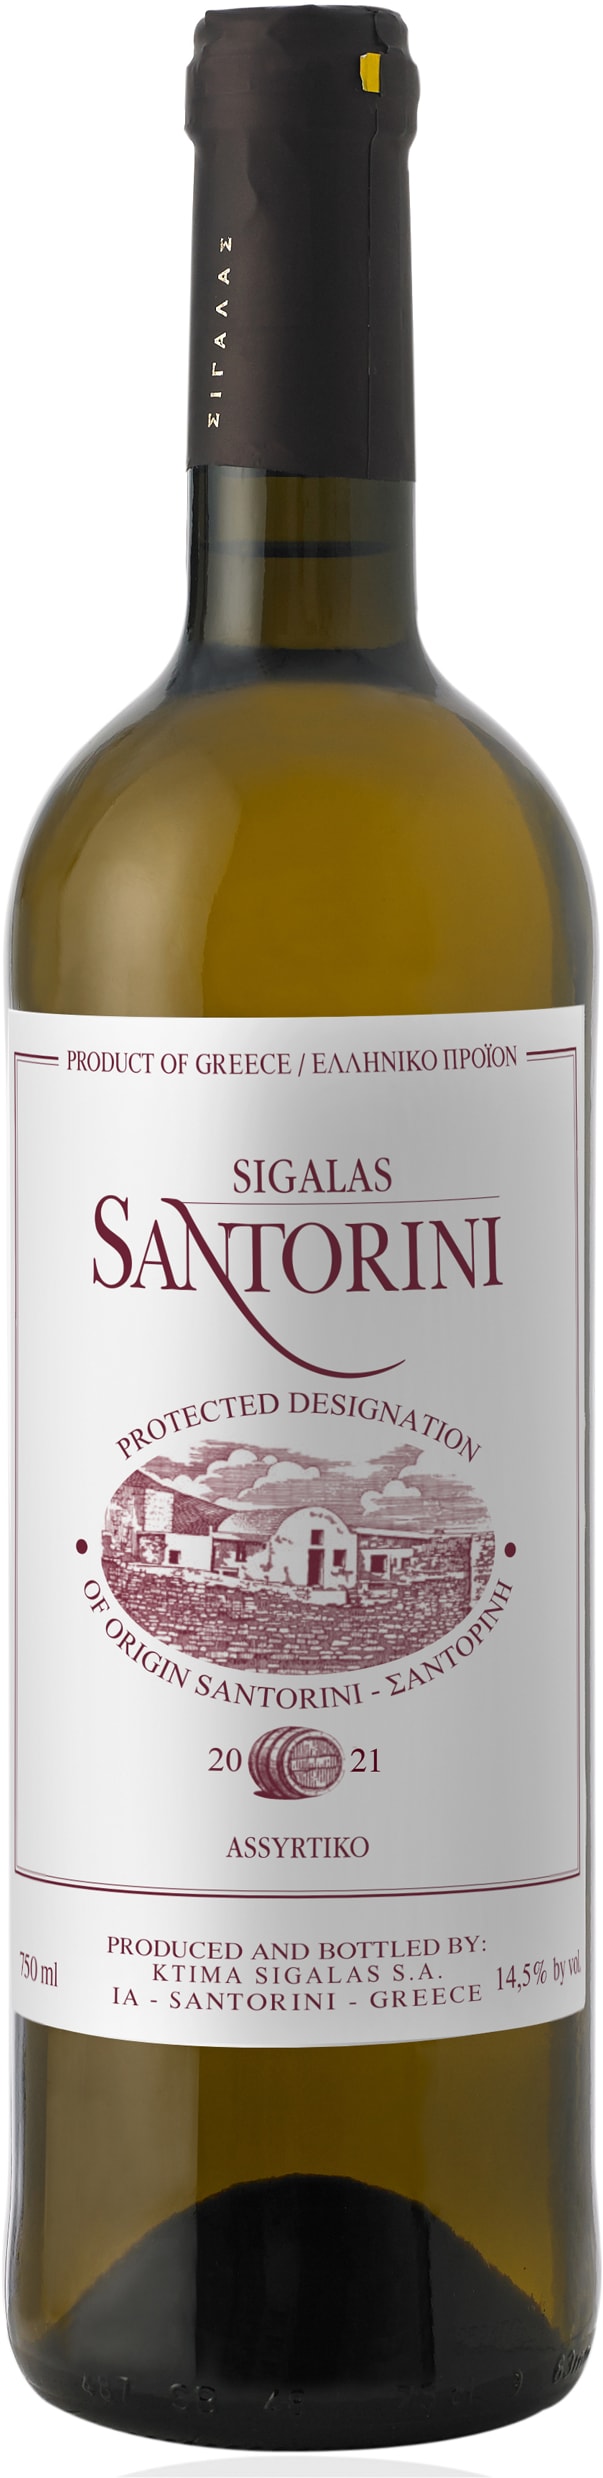 Sigalas Santorini Barrel Assyrtiko 2021 75cl - Buy Sigalas Wines from GREAT WINES DIRECT wine shop